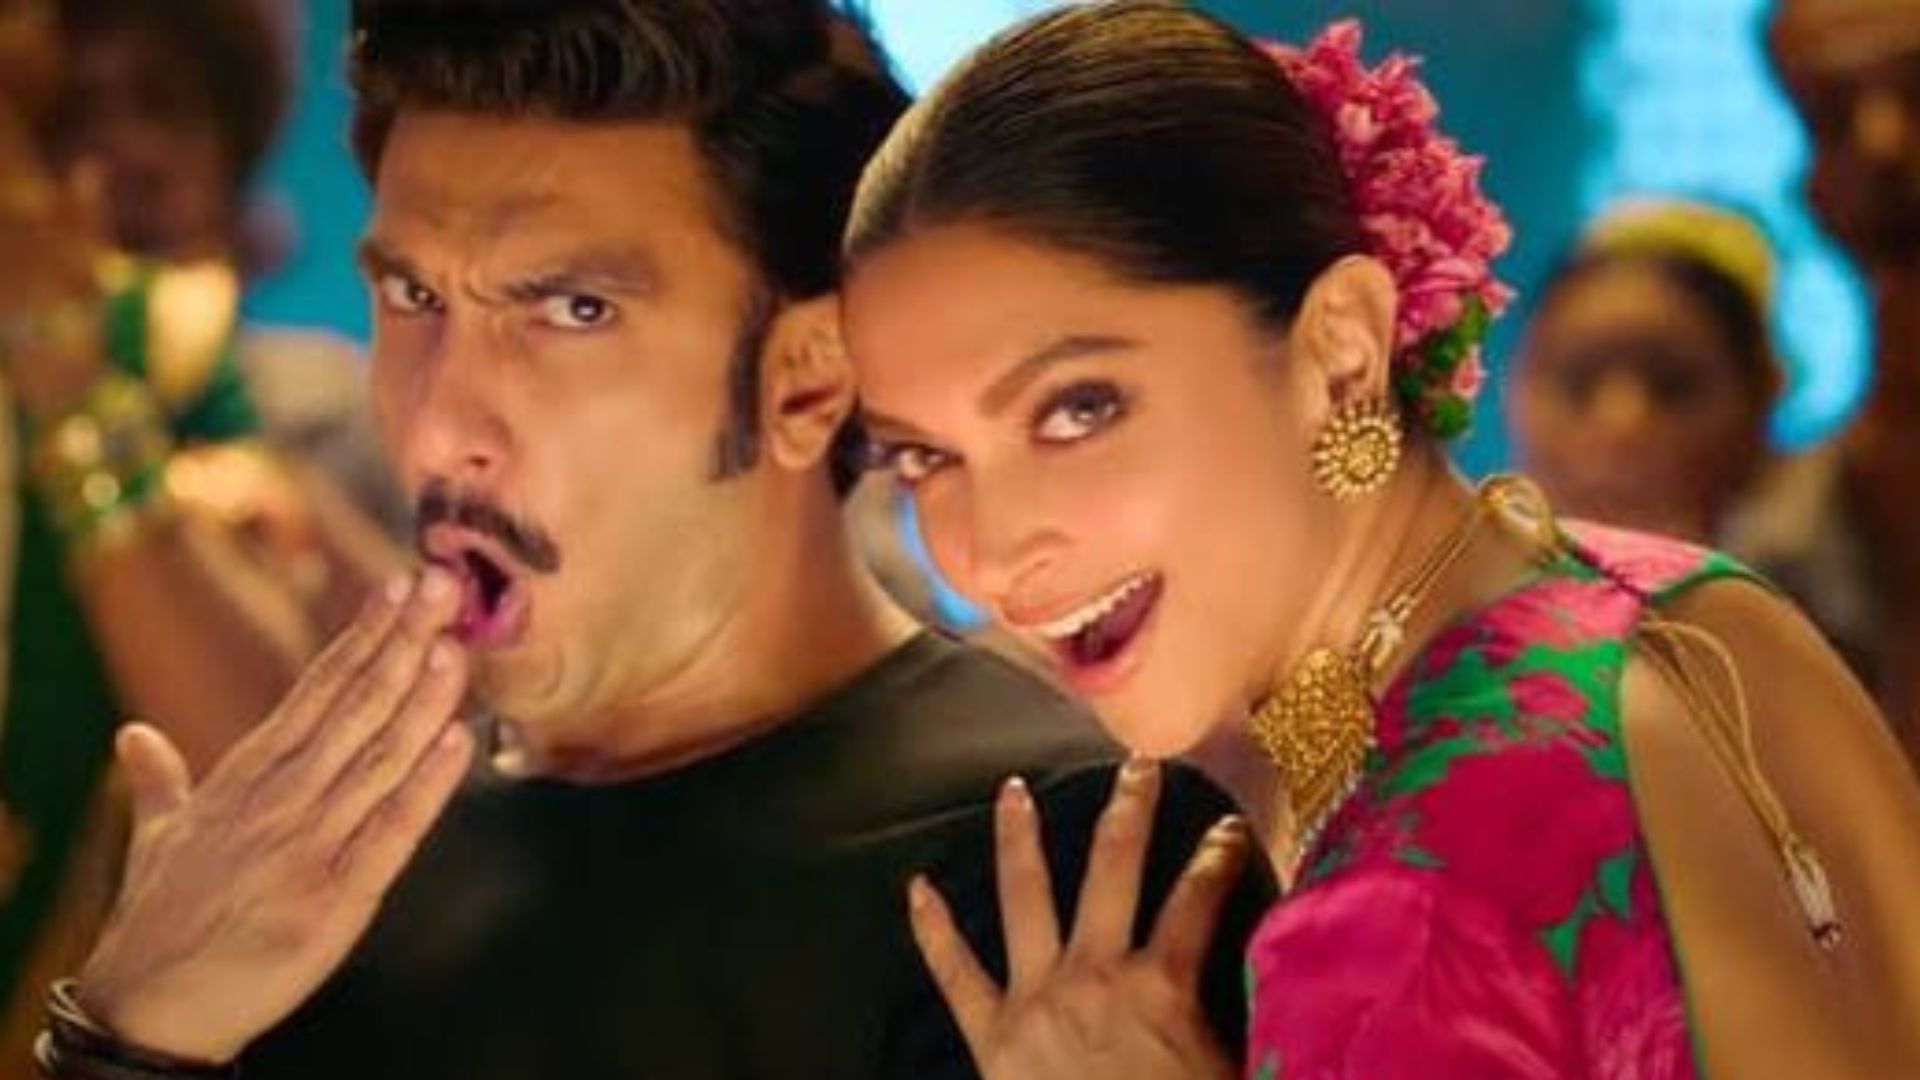 Ranveer Singh Reveals How He Built A Connection With Deepika Padukone Over The Struggle Of Being An Outsider